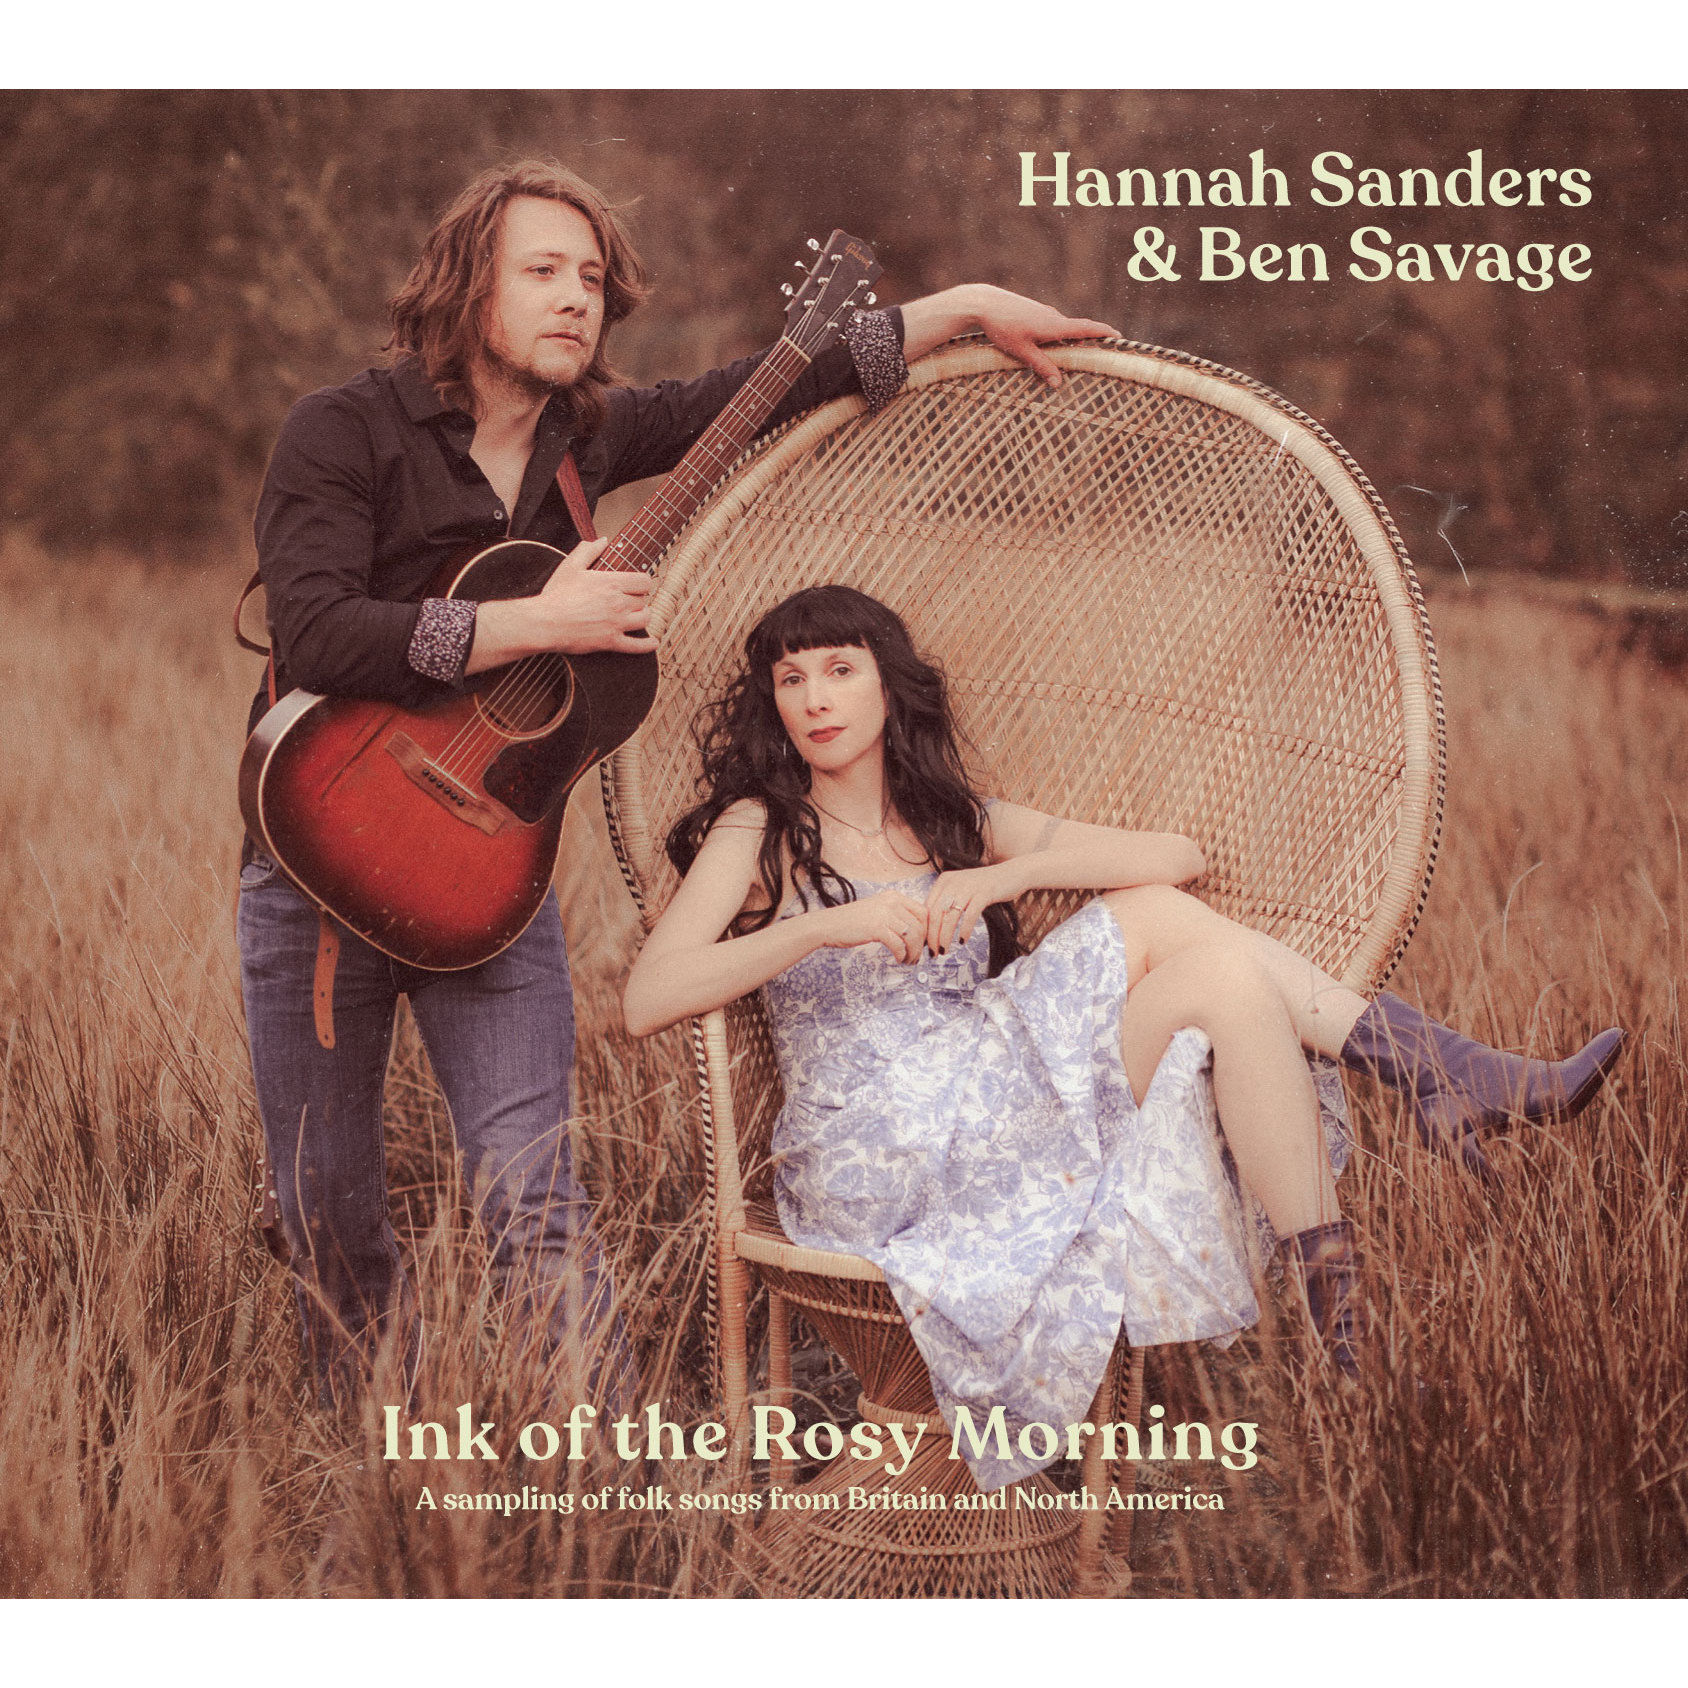 Hannah Sanders & Ben Savage - Ink of the Rosy Morning꞉ A Sampling of Folk Songs from Britain and North America (24-96)